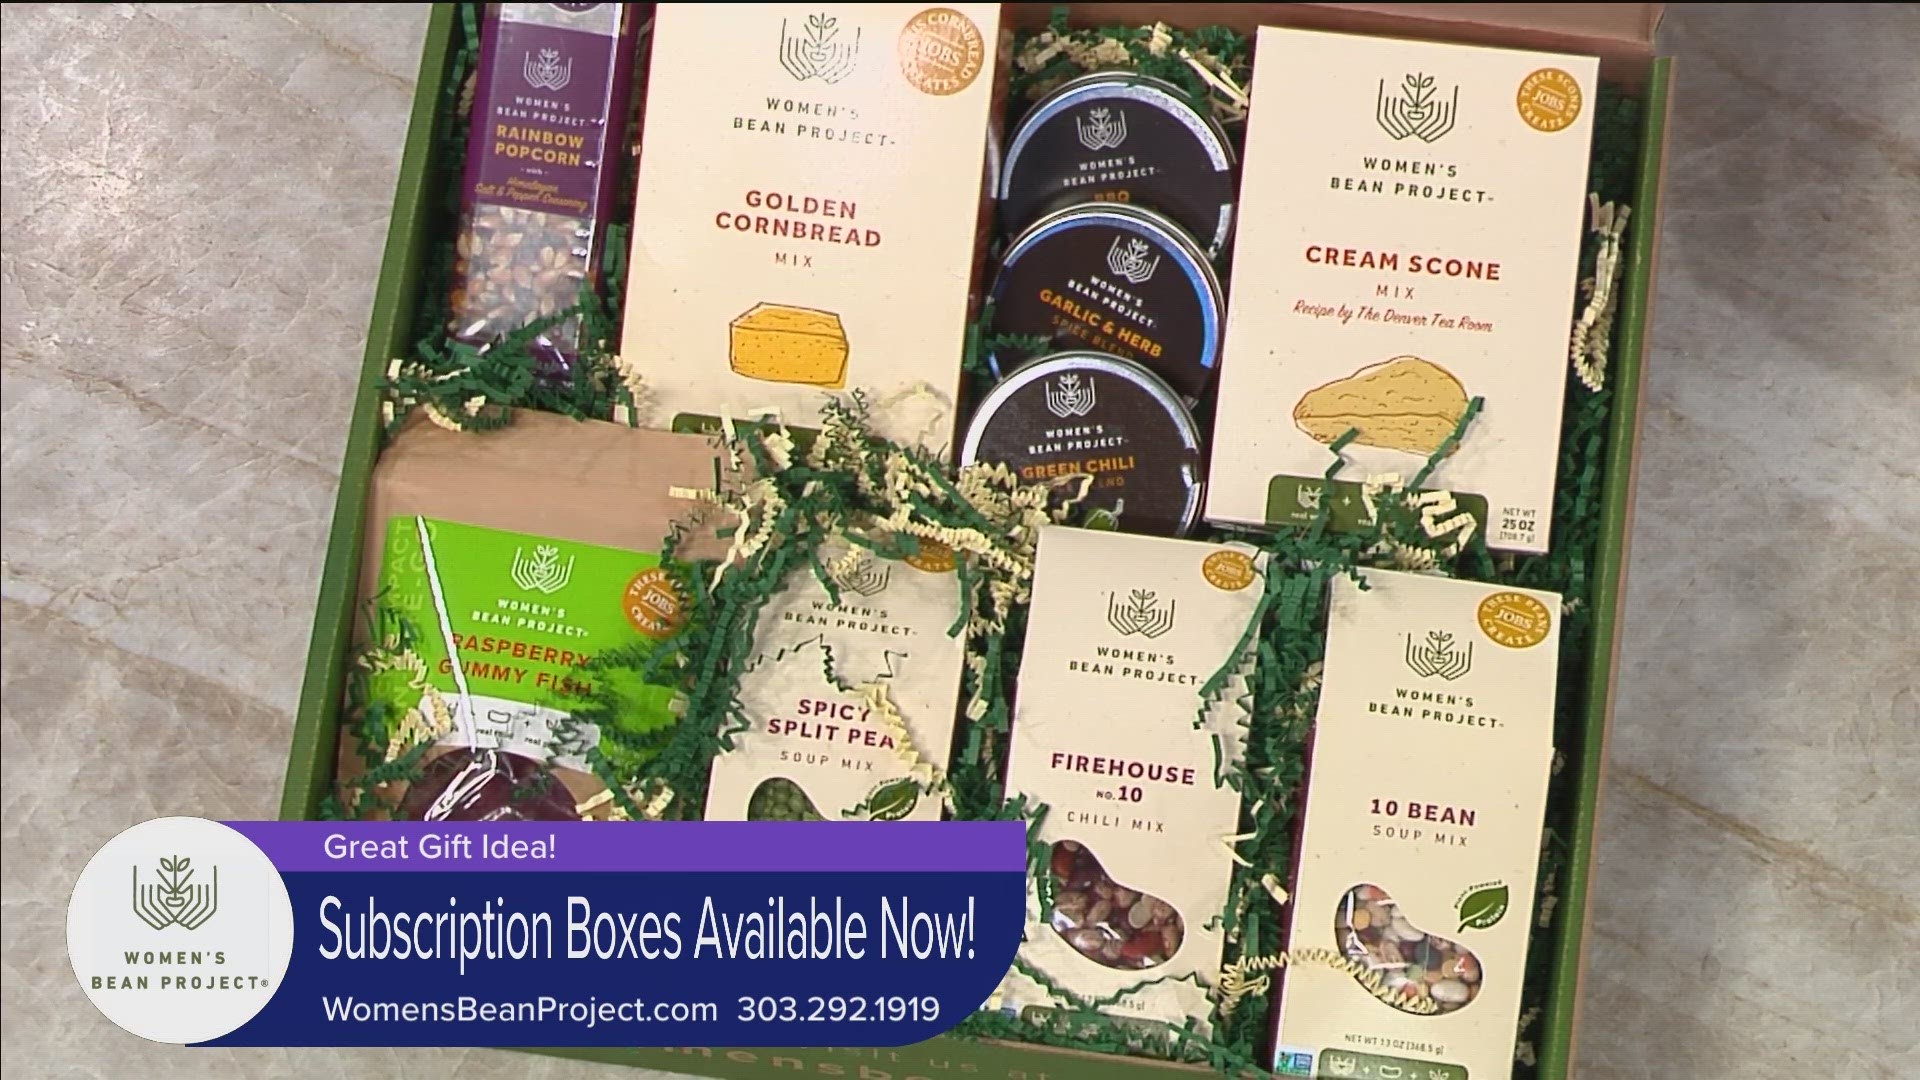 Get your WBP Subscription Box! Every 3 months, a delicious assortment of products will be delivered to your door! Learn more at WomensBeanProject.com.